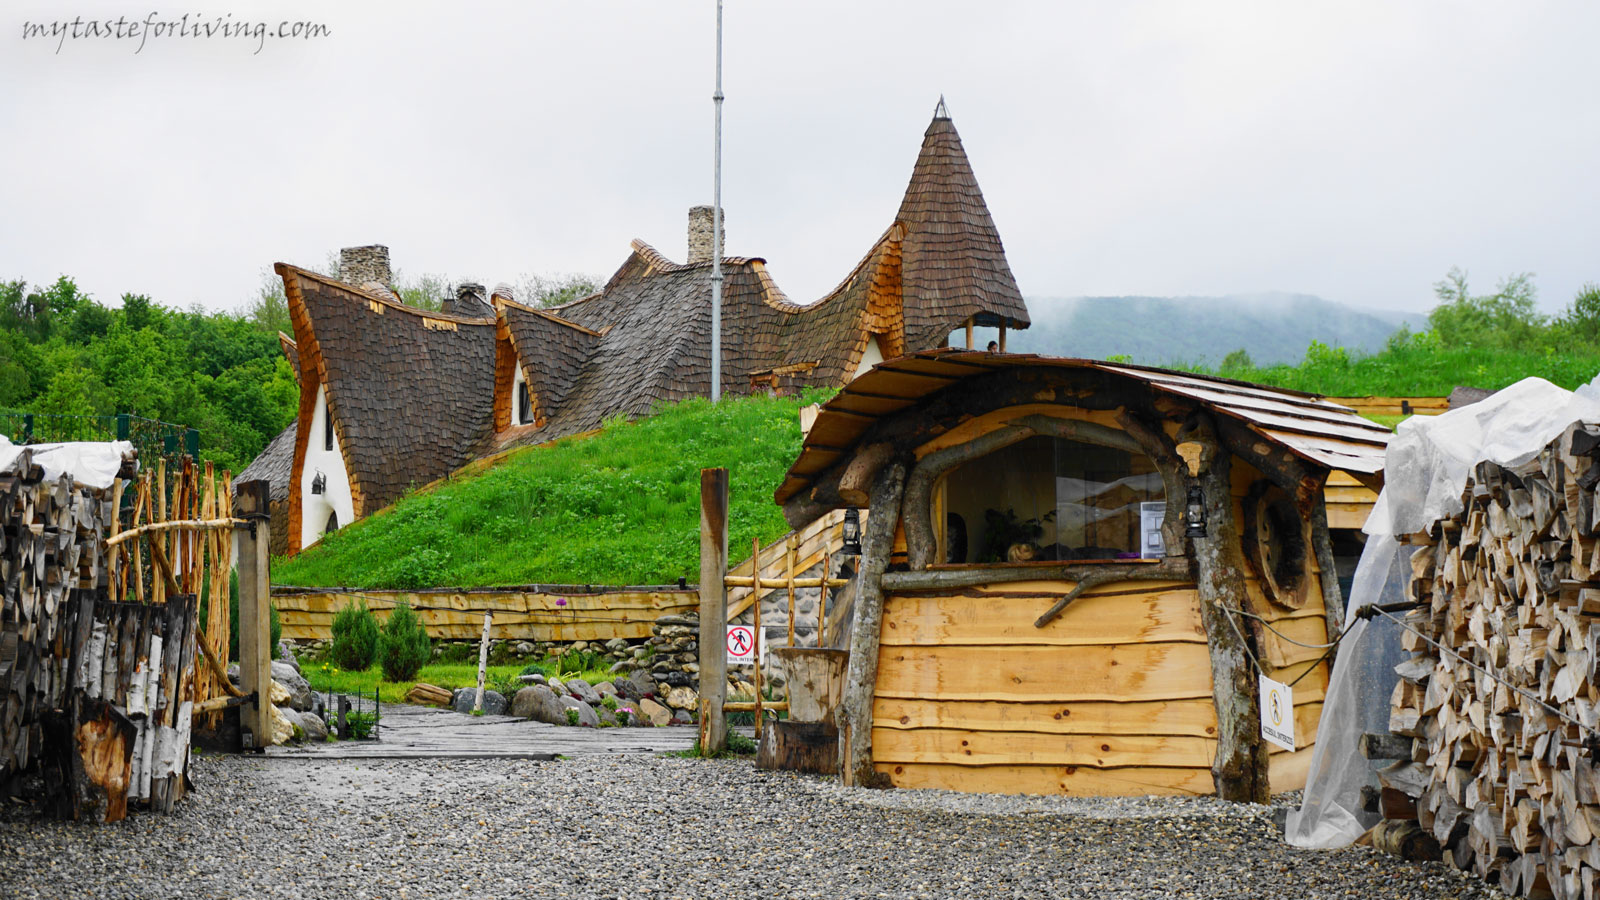 Clay Castle in the valley of the Fairies - Castelul de Lut Valea Zanelor is located near the city of Sibiu, Romania and its most interesting feature is that it is built with organic materials-clay, straw, sand and wood.